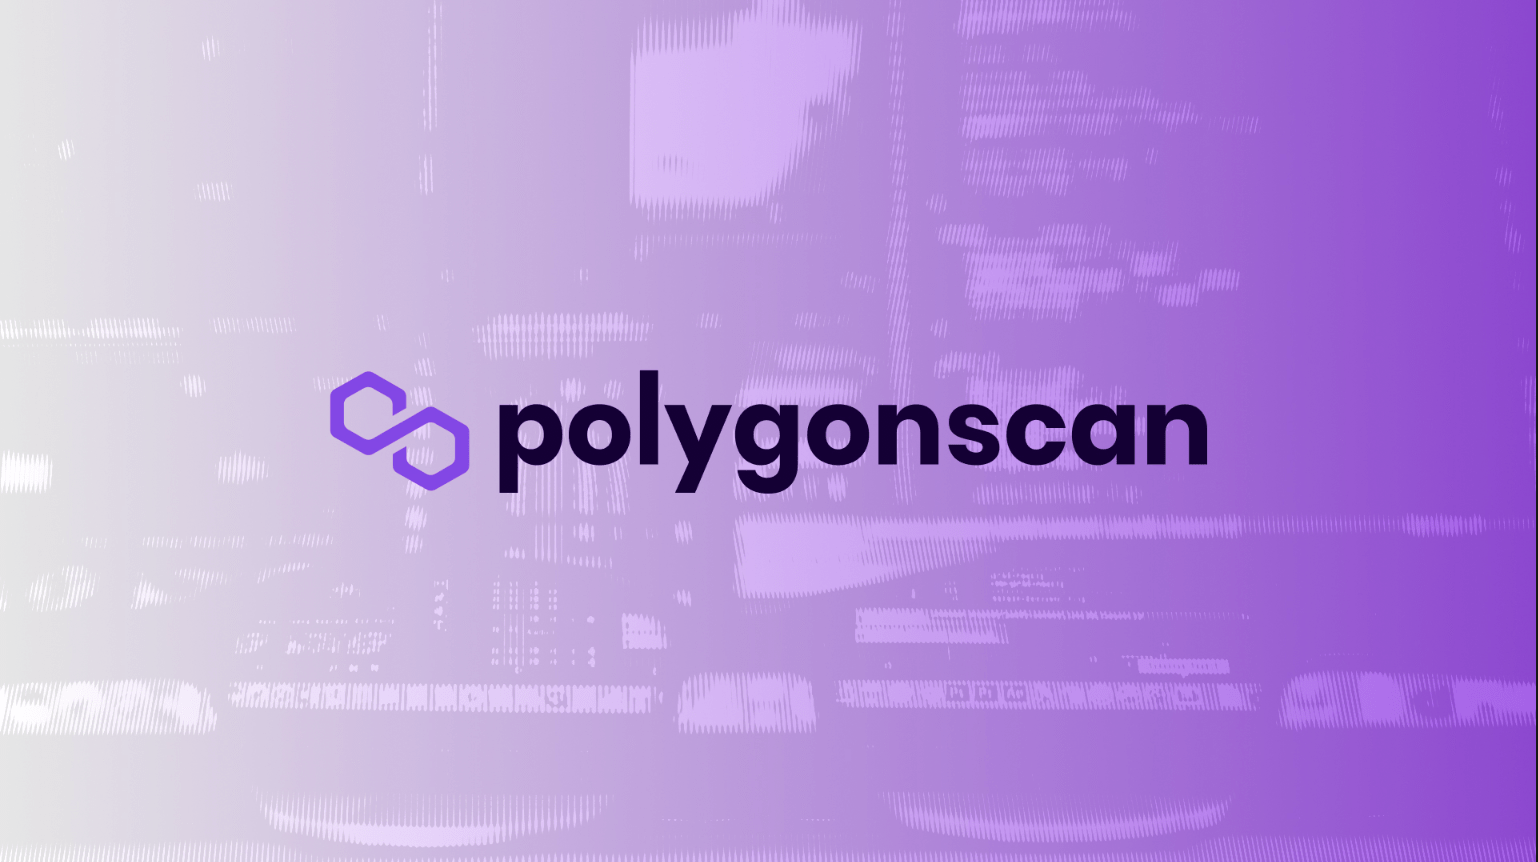 Data from PolygonScan showed that the blockchain had not produced any new blocks or processed transactions for some time